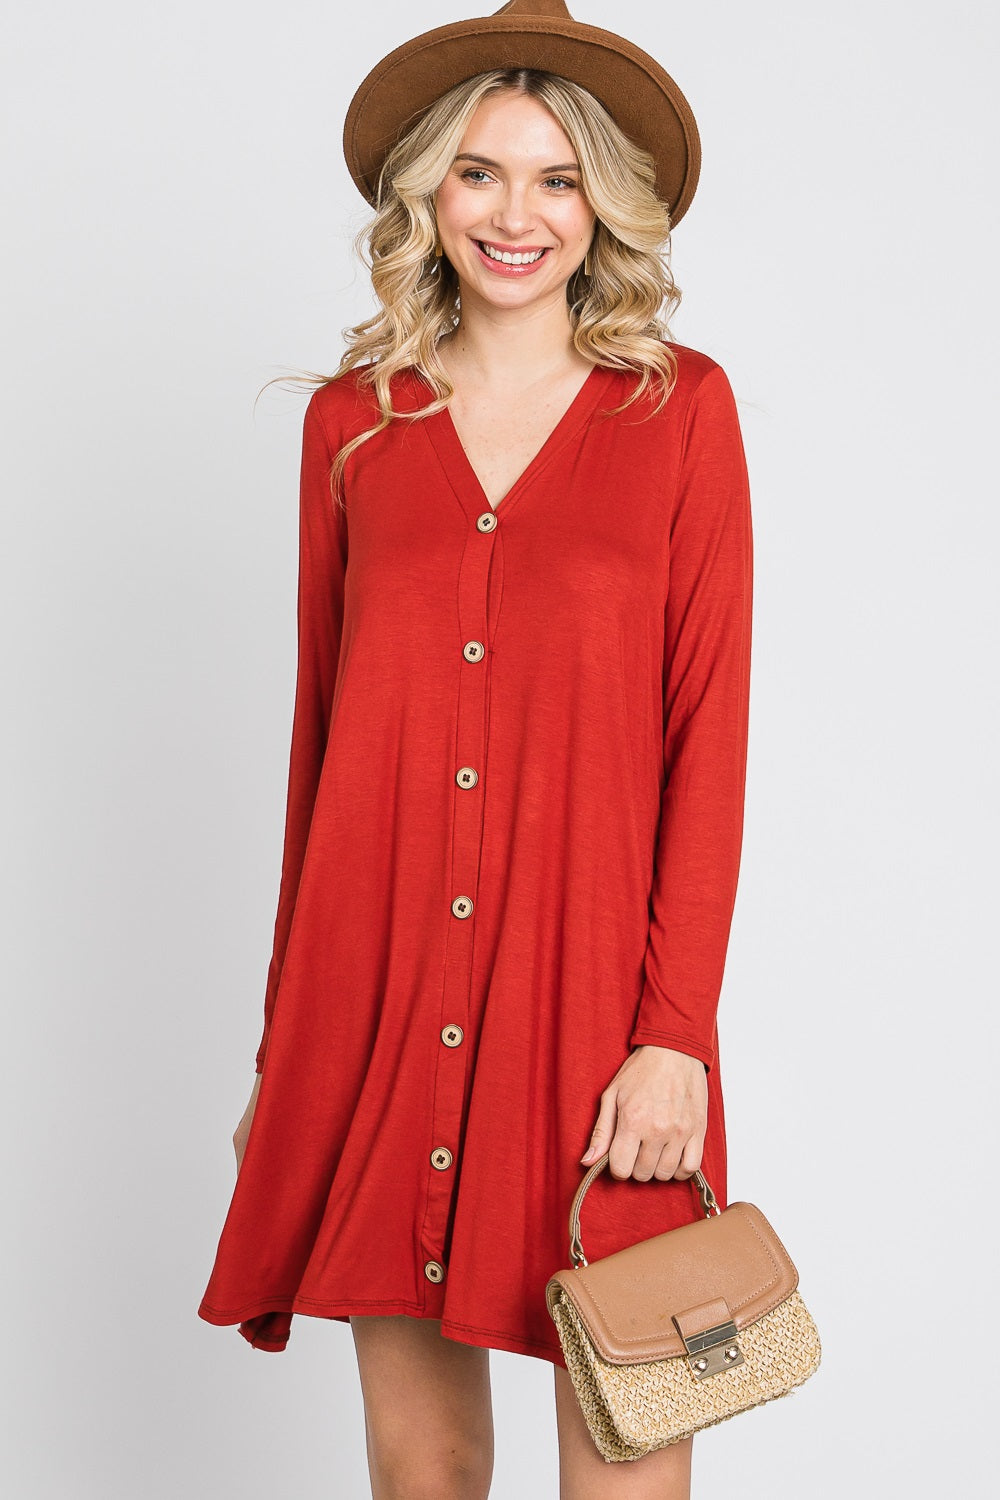 Long Sleeve v neck button down casual rust dress